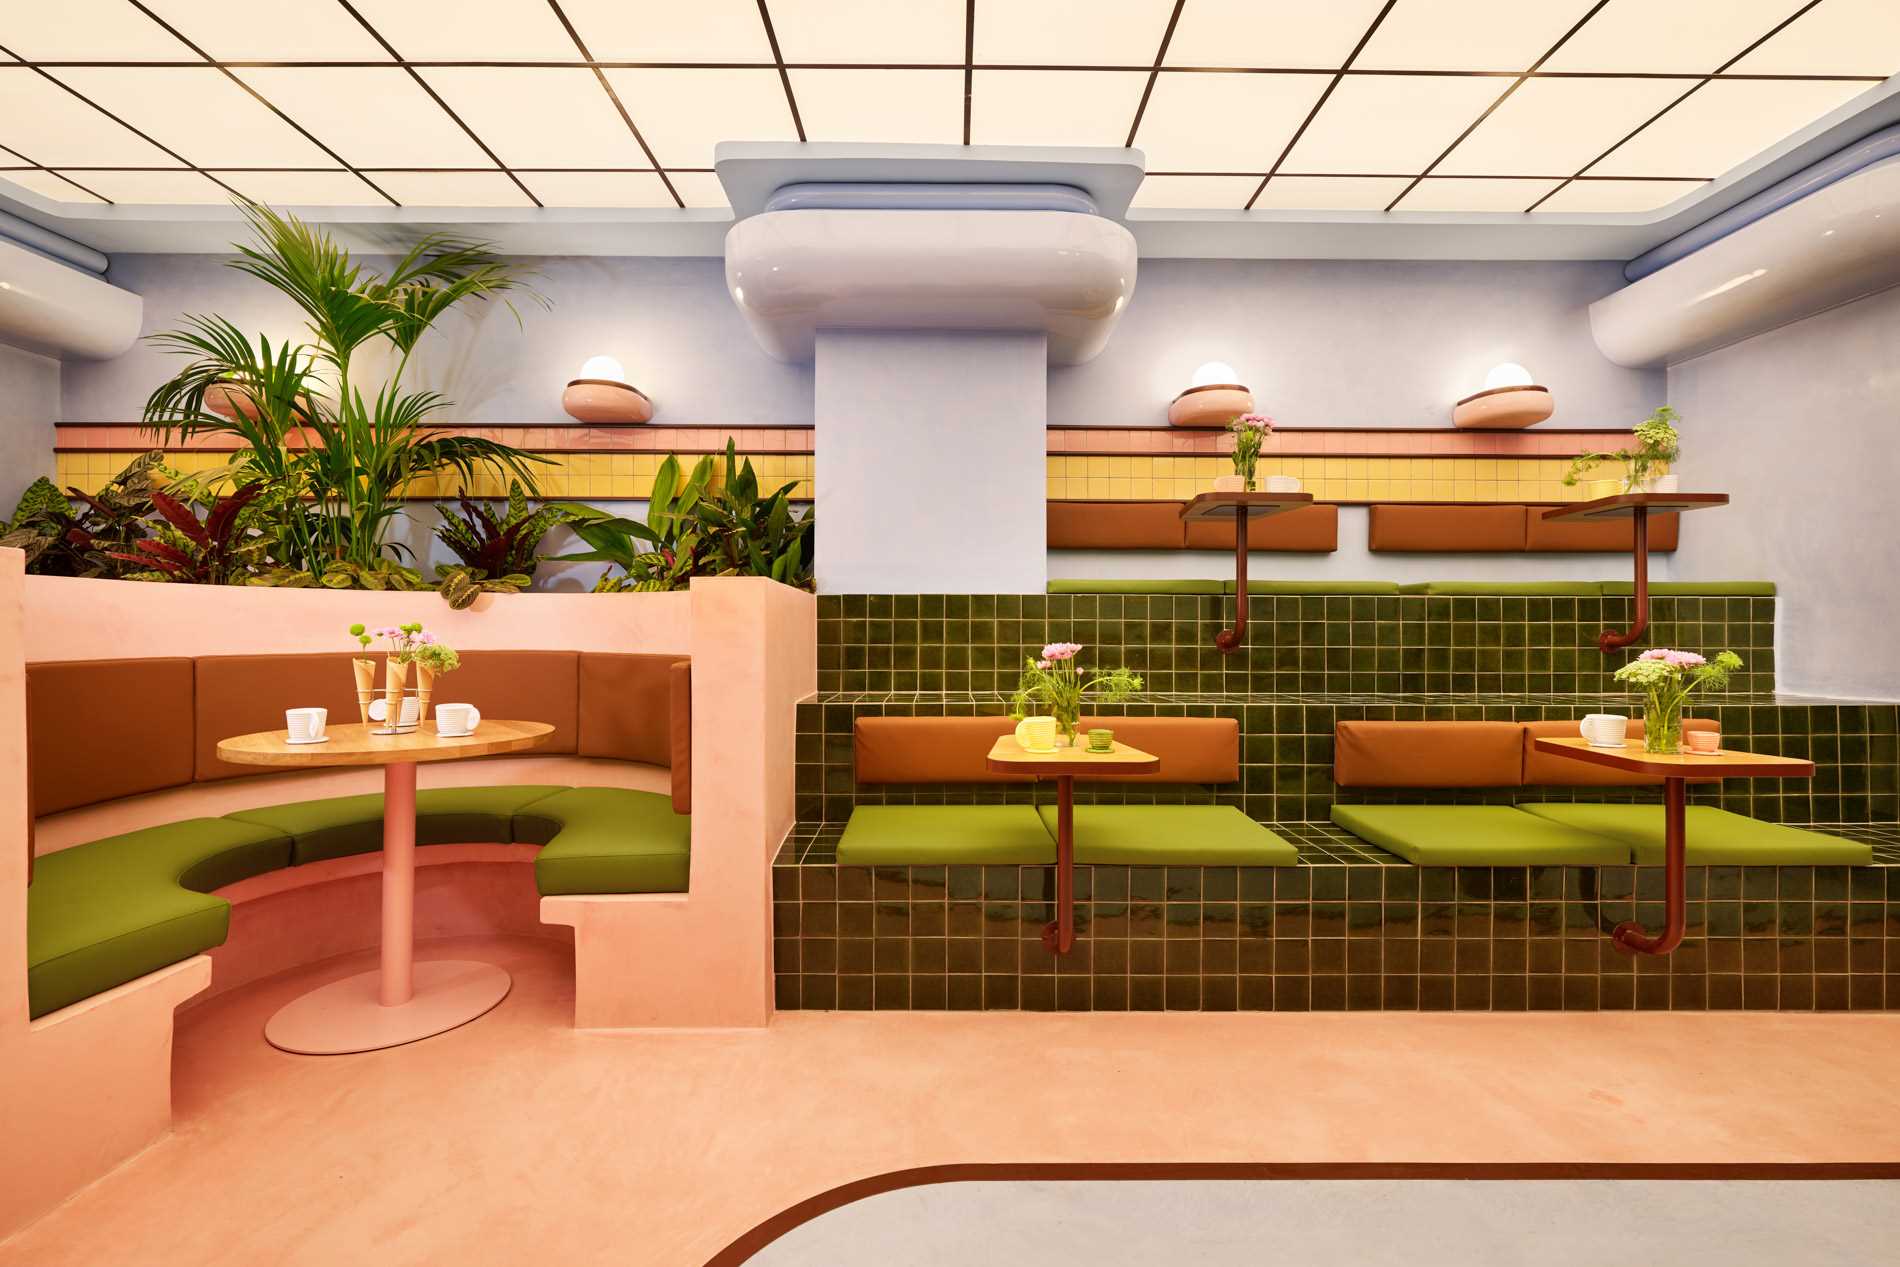 The interior design of Amiko Gelato  blends futuristic design with art deco elements, like curves, glazed tiles, and pastel colors.